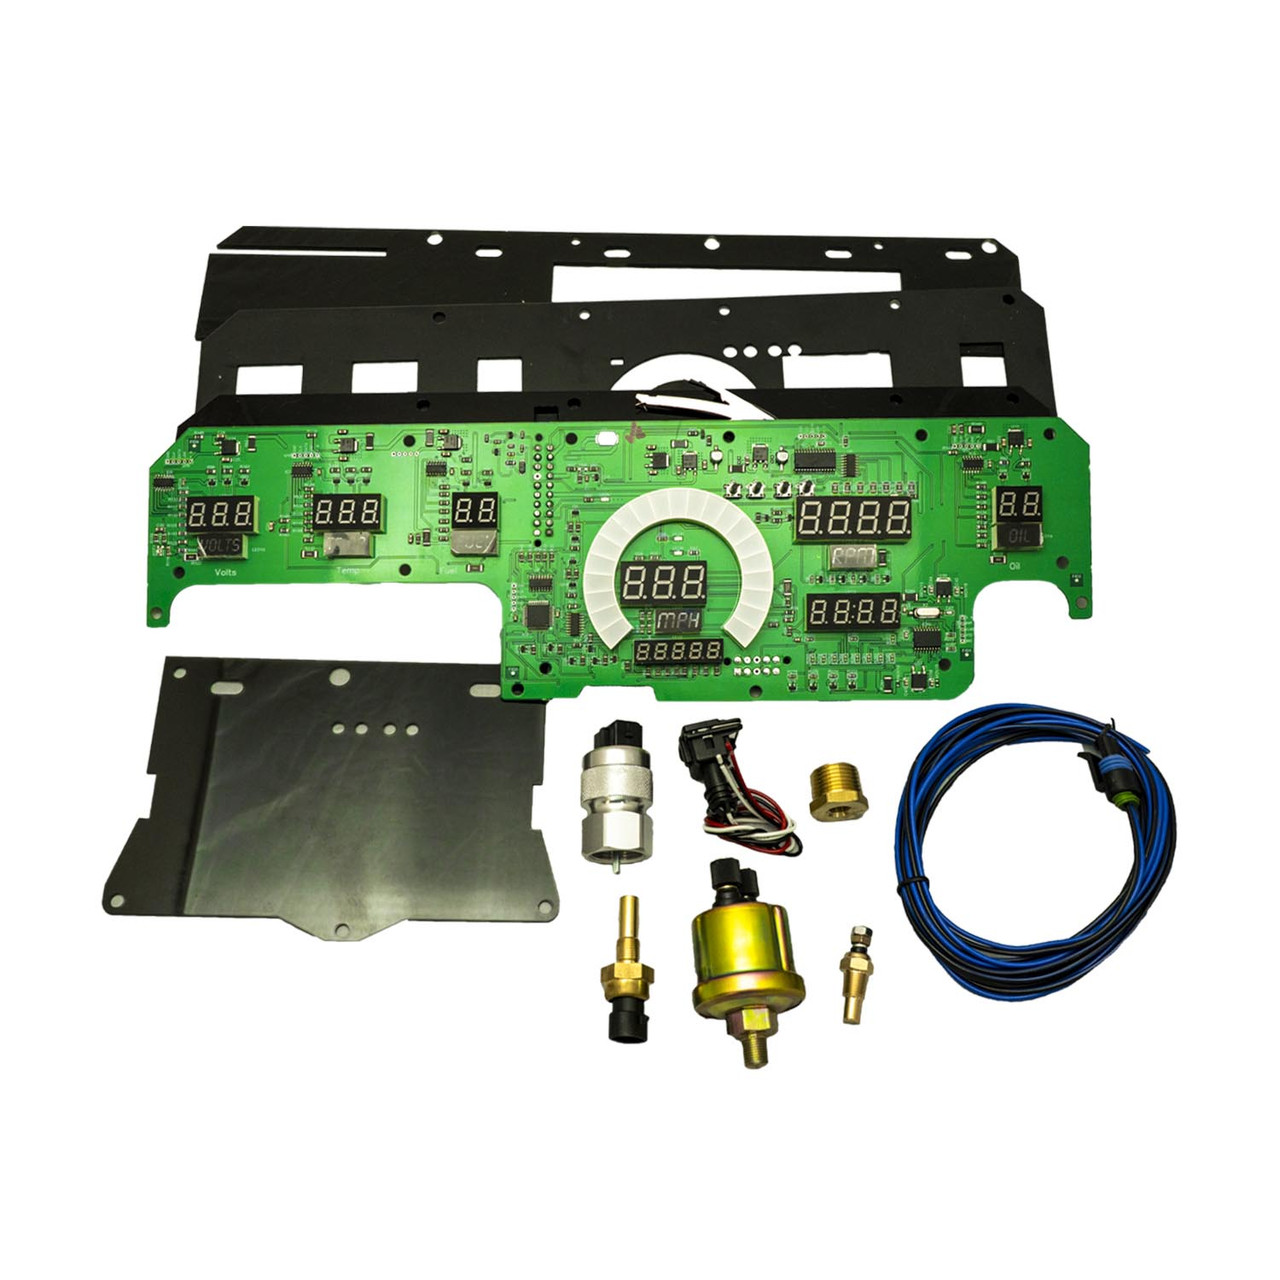 Panel and parts - DP1805